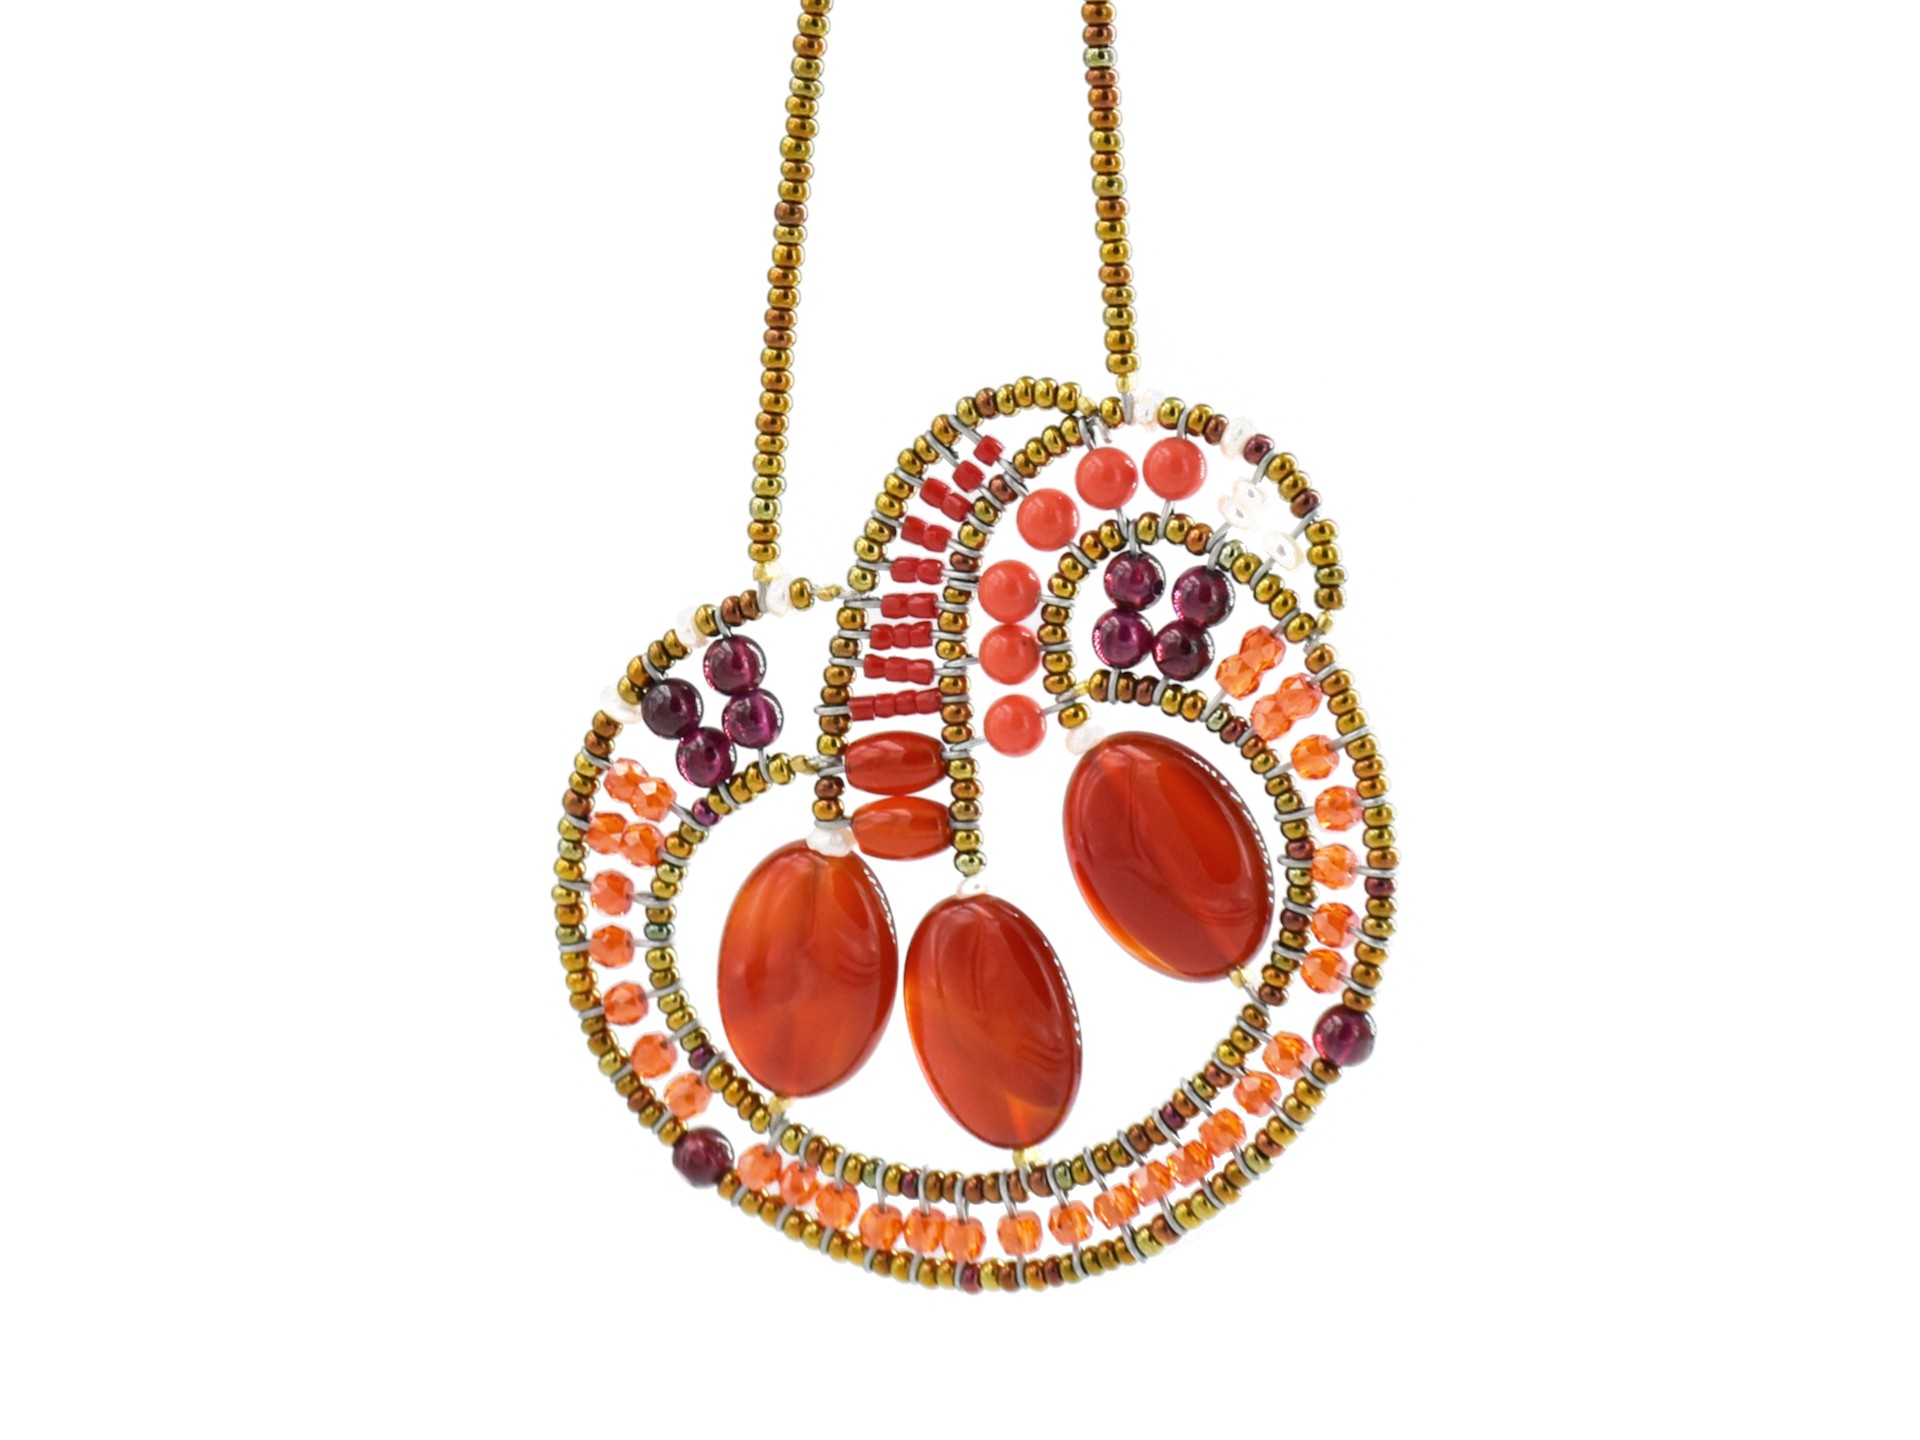 necklace with gold and red stones